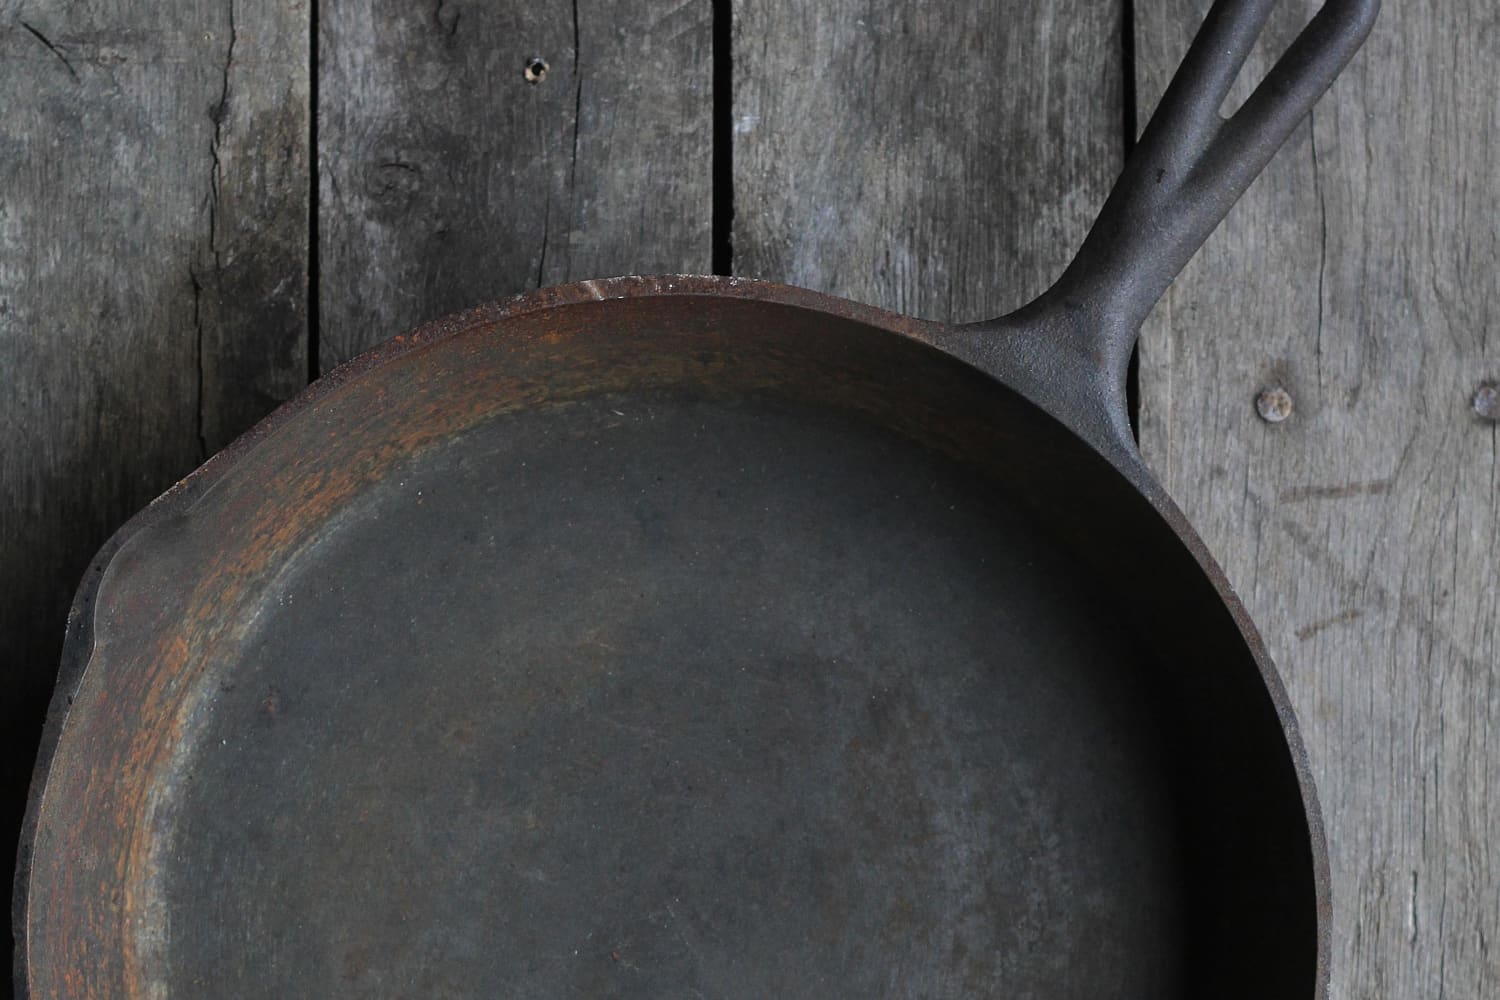 The Cast Iron Pan Dilemma  Ideas and Inspiration to Store Cast